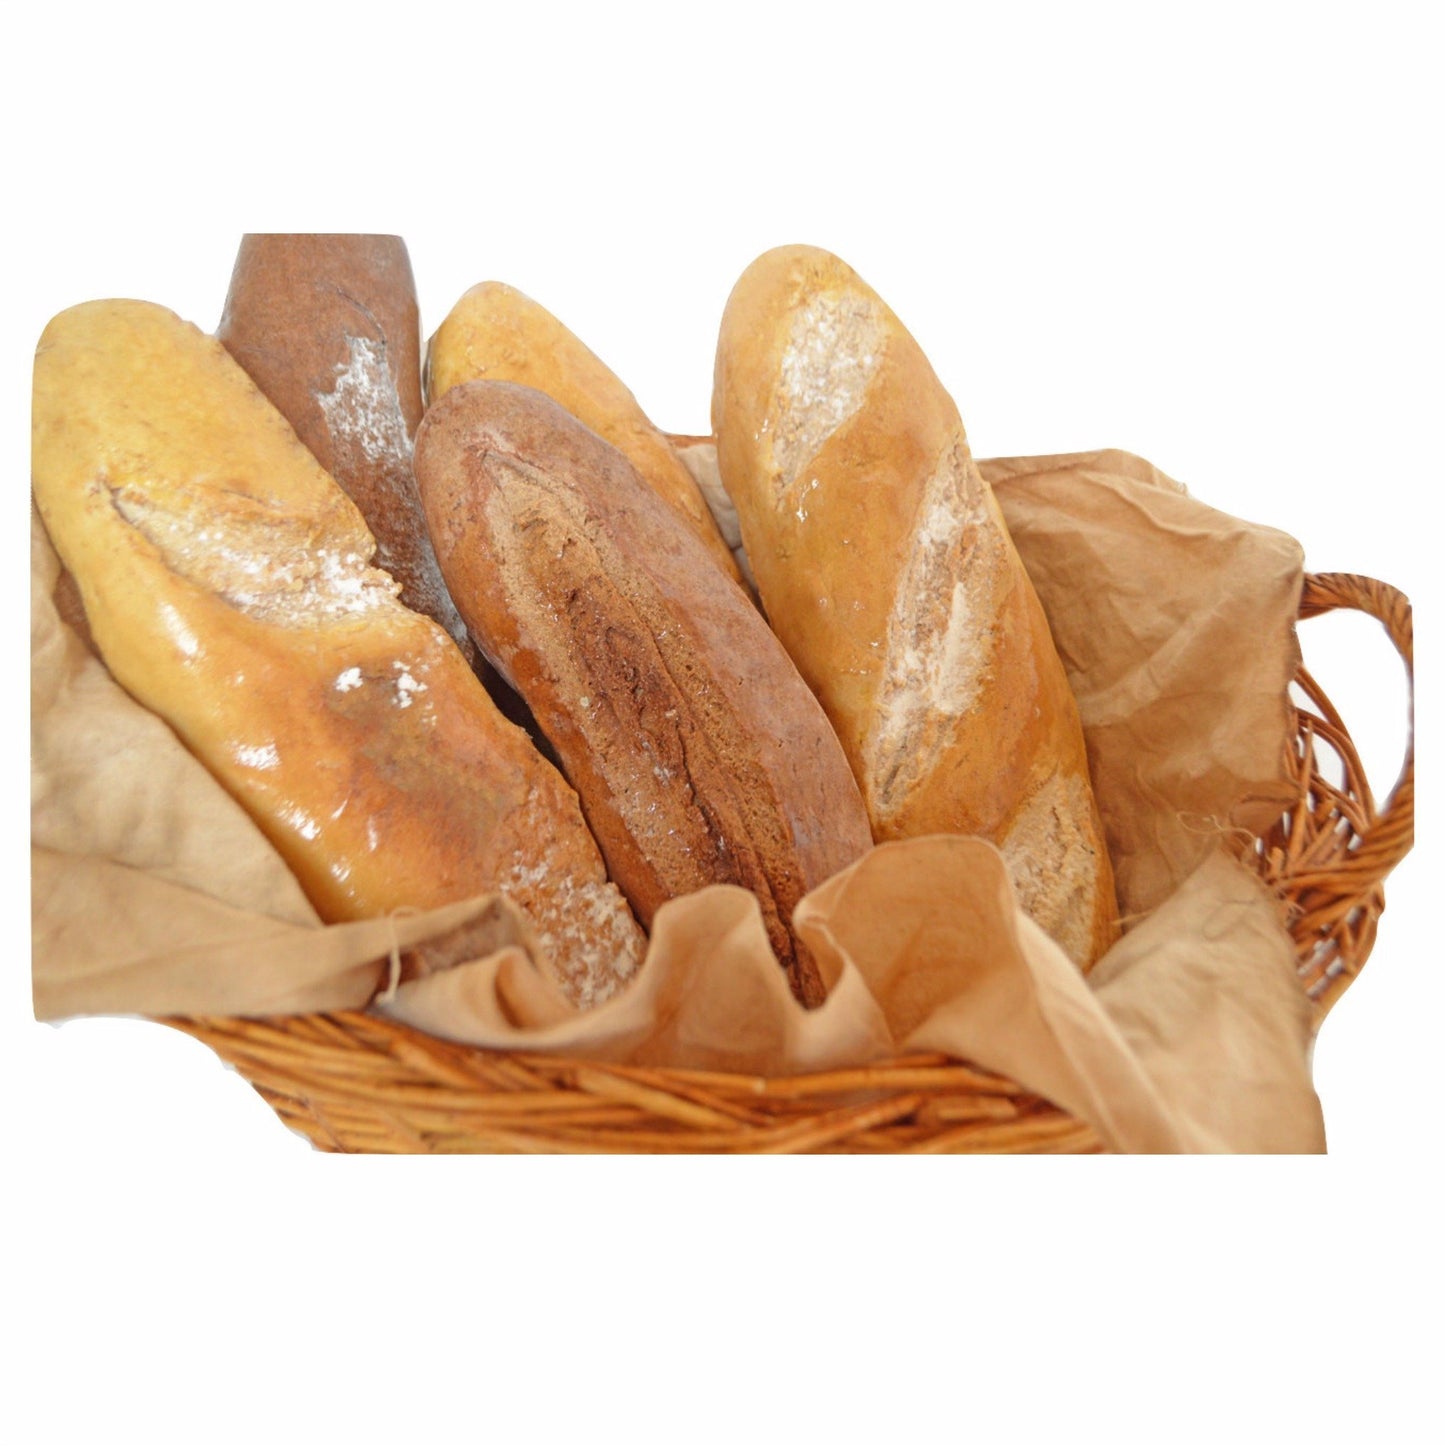 Everything Dawn Bakery Candle Treats Fake Bread Rustic French Bread Loaf Single